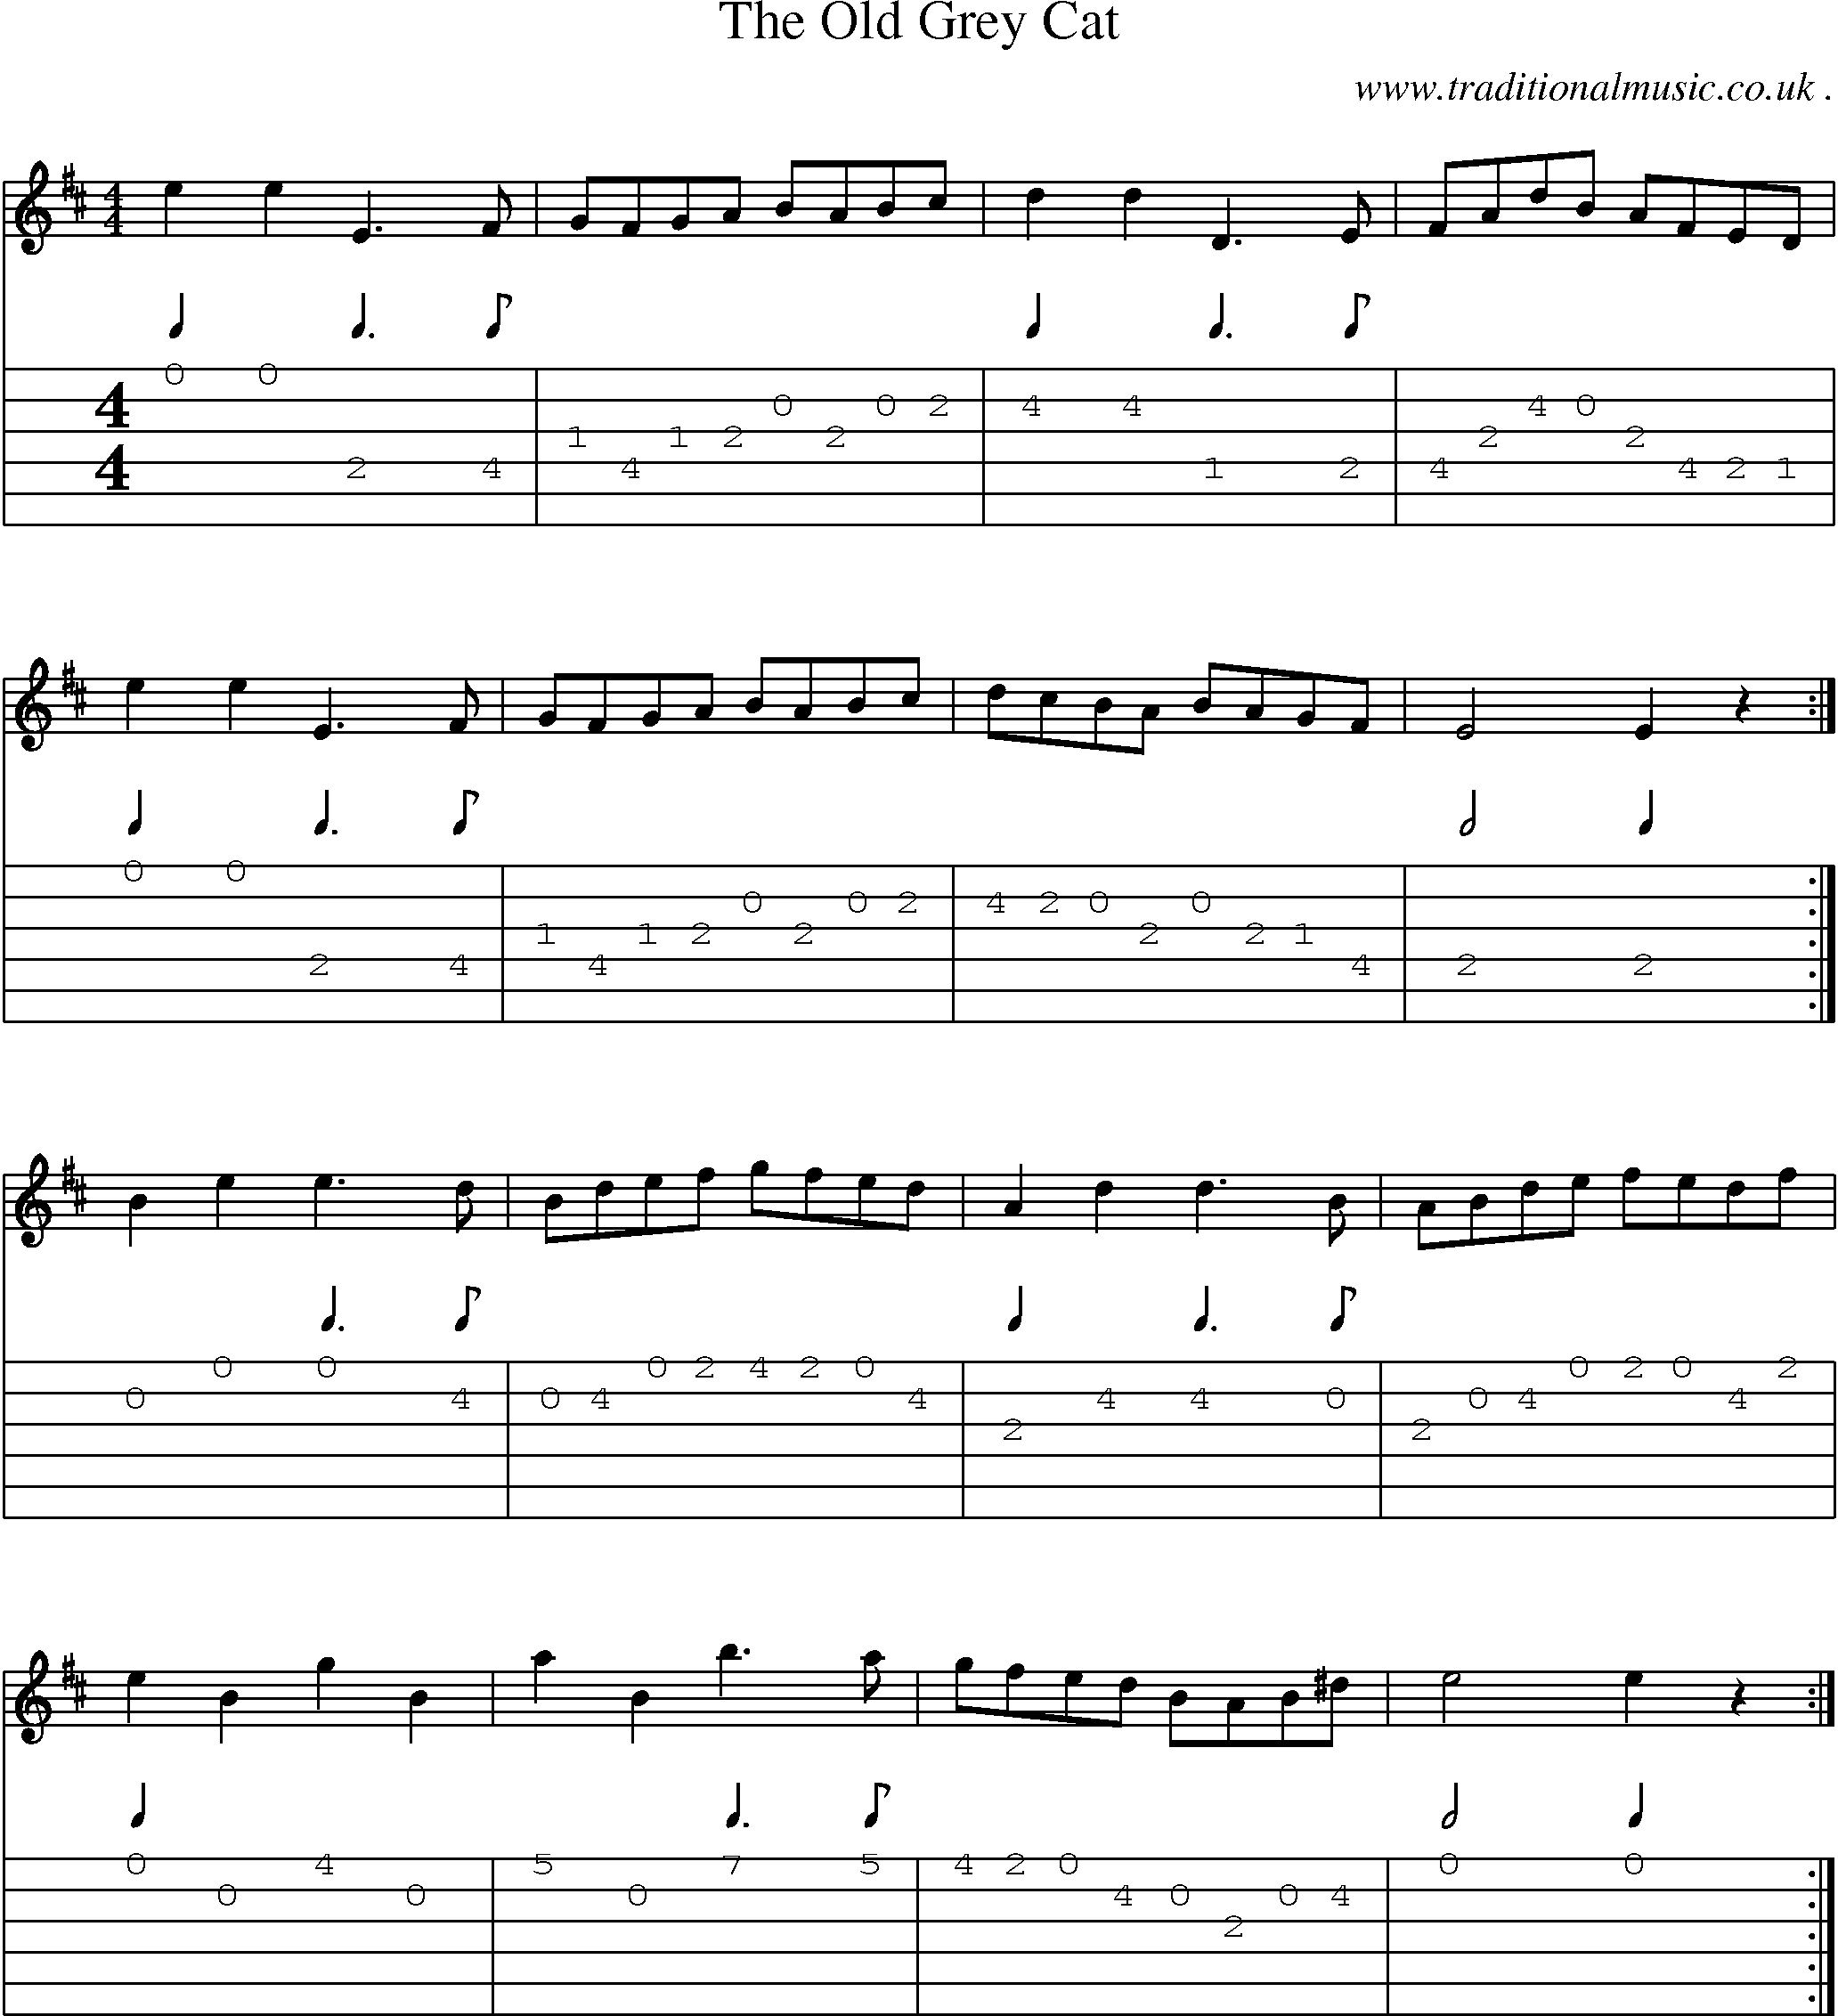 Sheet-music  score, Chords and Guitar Tabs for The Old Grey Cat